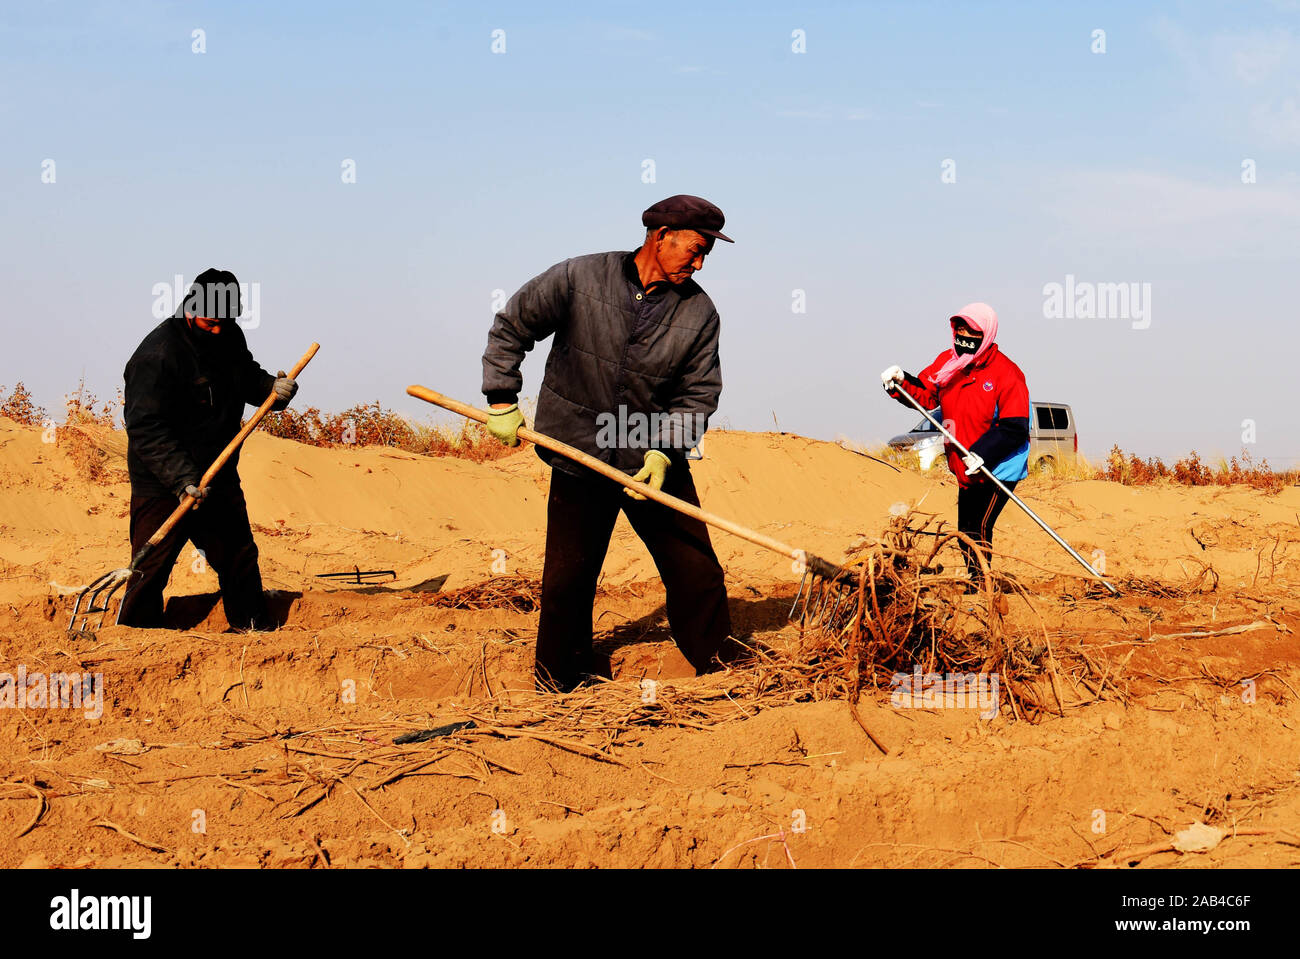 (191125) -- HUHHOT, Nov. 25, 2019 (Xinhua) -- Workers harvest licorice in the Ulan Buh Desert, north China's Inner Mongolia Autonomous Region, Nov. 21, 2019. A plant designed to combat desertification has not only helped buffer sand dunes from spreading in the Ulan Buh Desert, the eighth-largest in China, but has also provided a new source of income to local residents.    Licorice, commonly known as sweet grass, is a commonly used herb in Chinese medicine prescriptions. With the role of biological nitrogen fixation and sand control, the plant has grown well with plenty of sunshine and the big Stock Photo